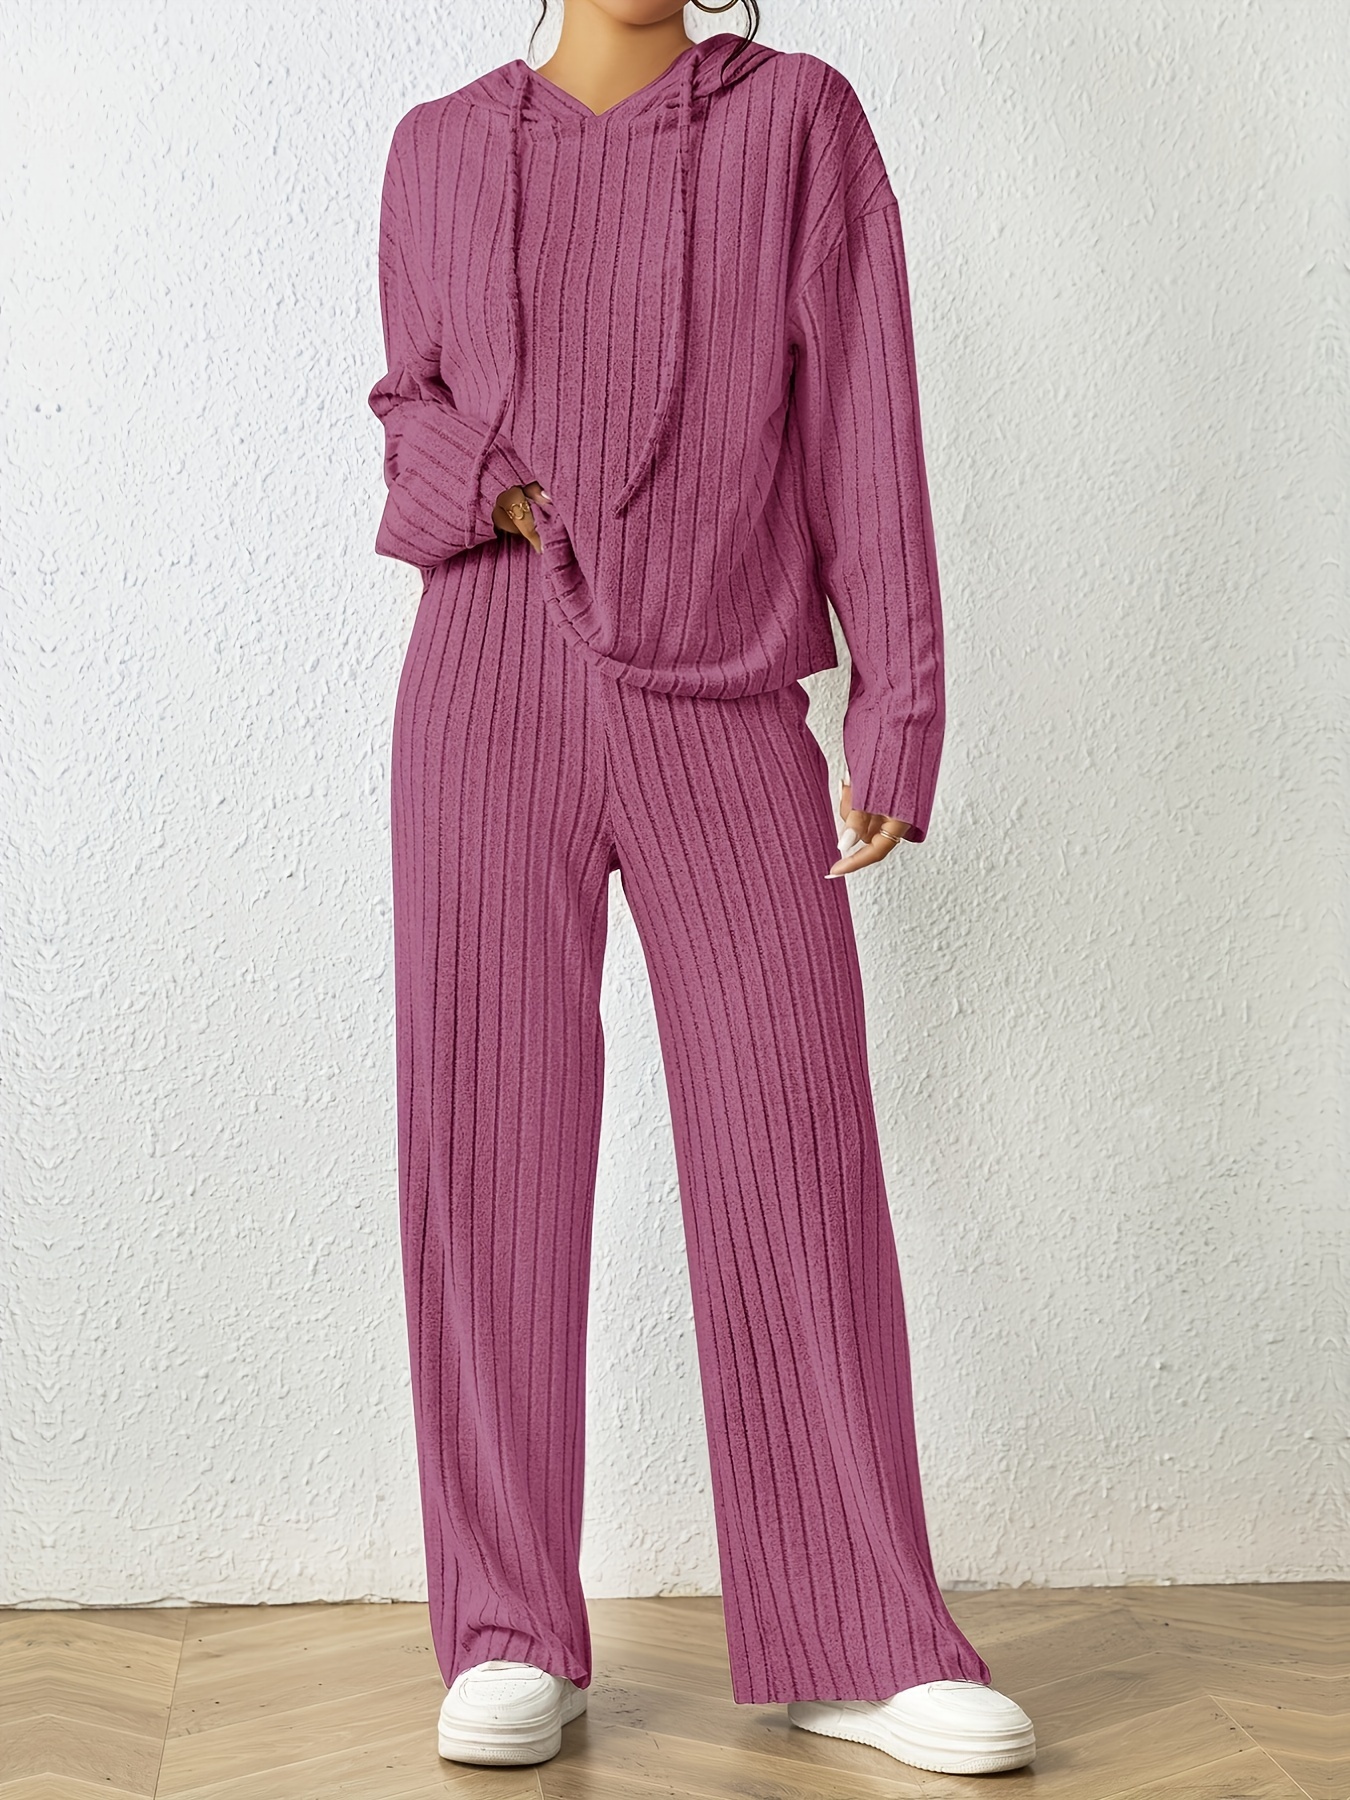 Pinstripe Pant Suit Women Women's Casual Solid Long Sleeve Suits